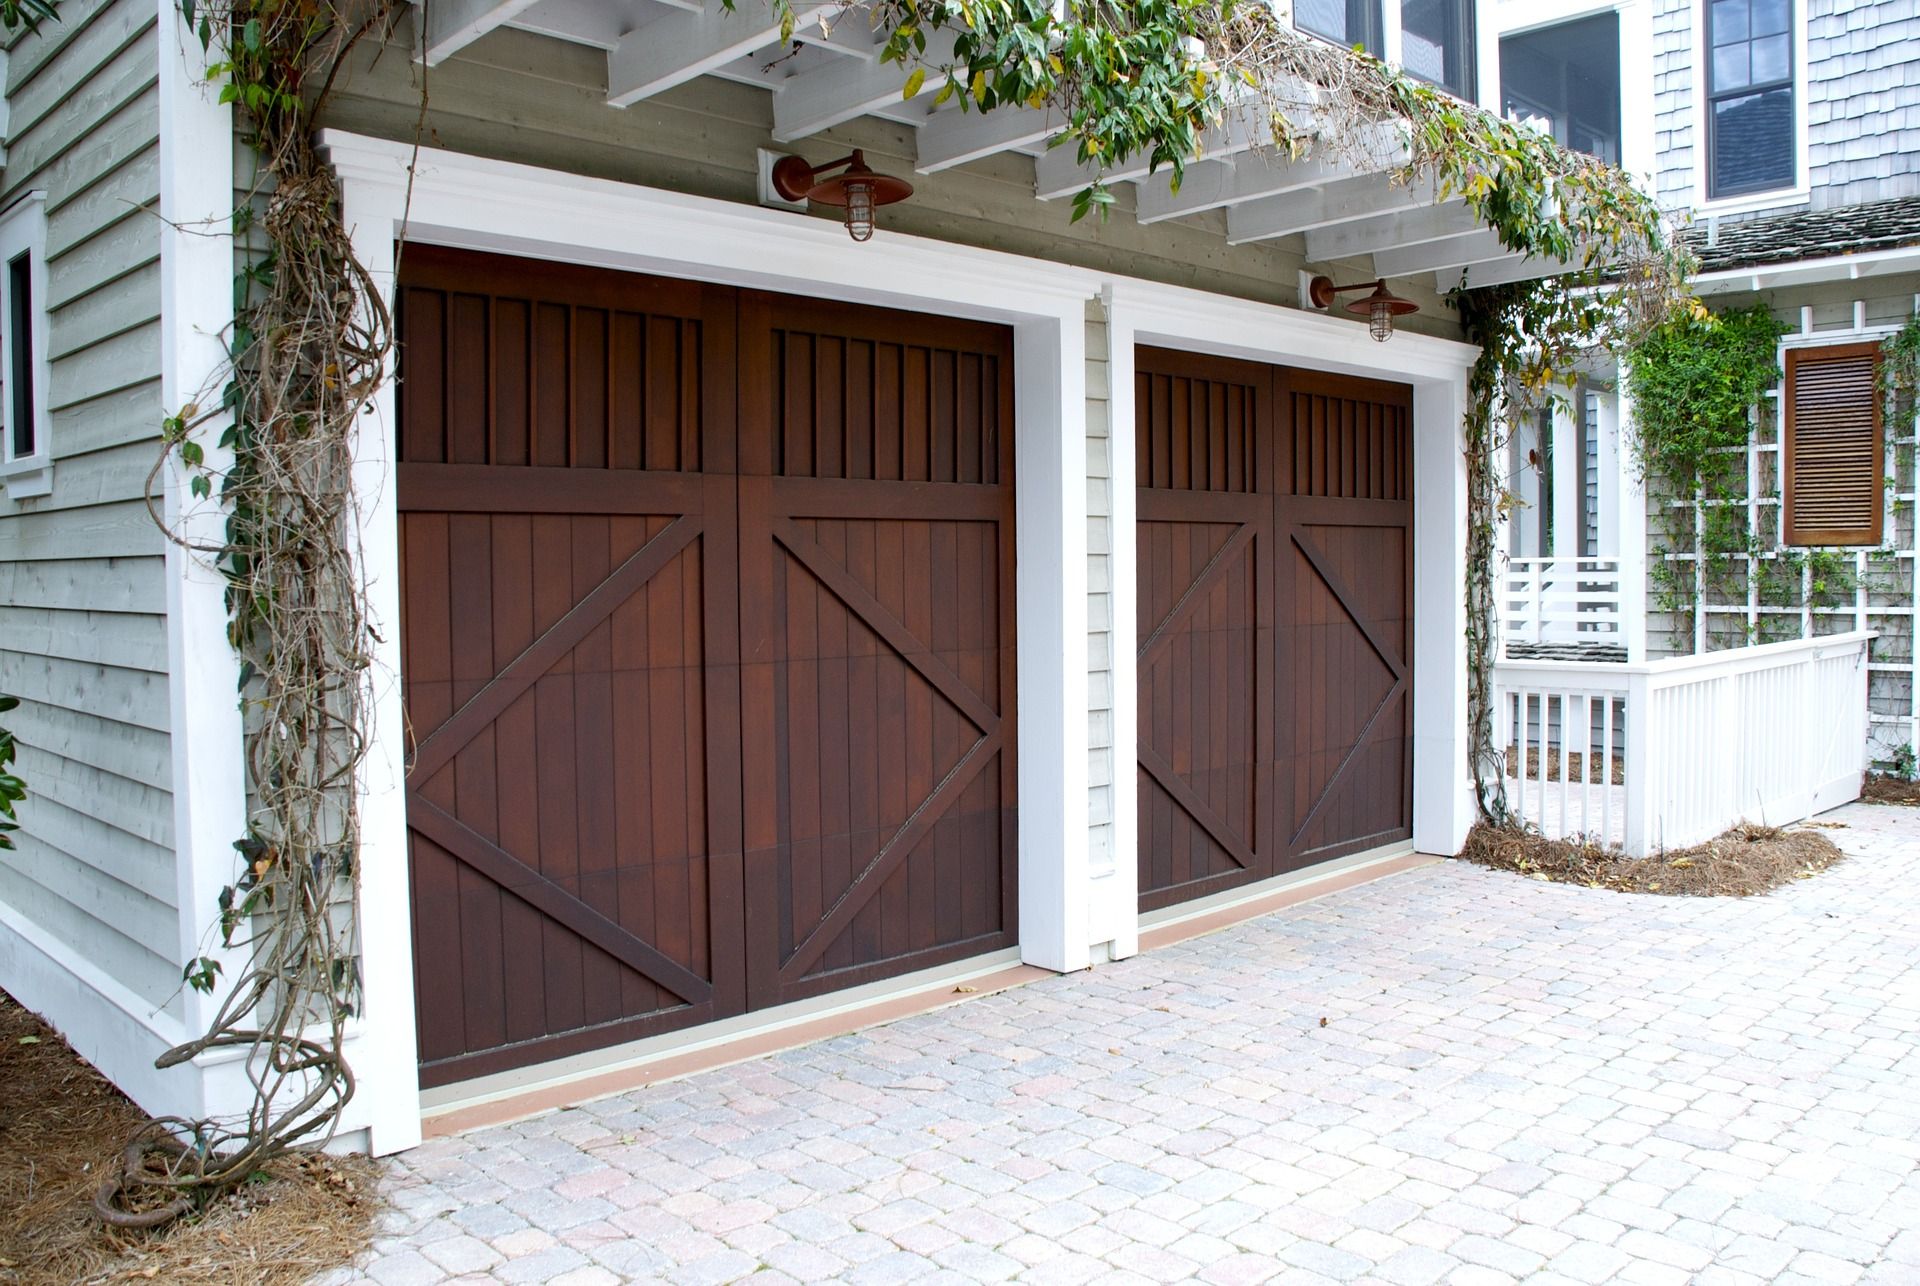 Garage door and driveway in front of a house